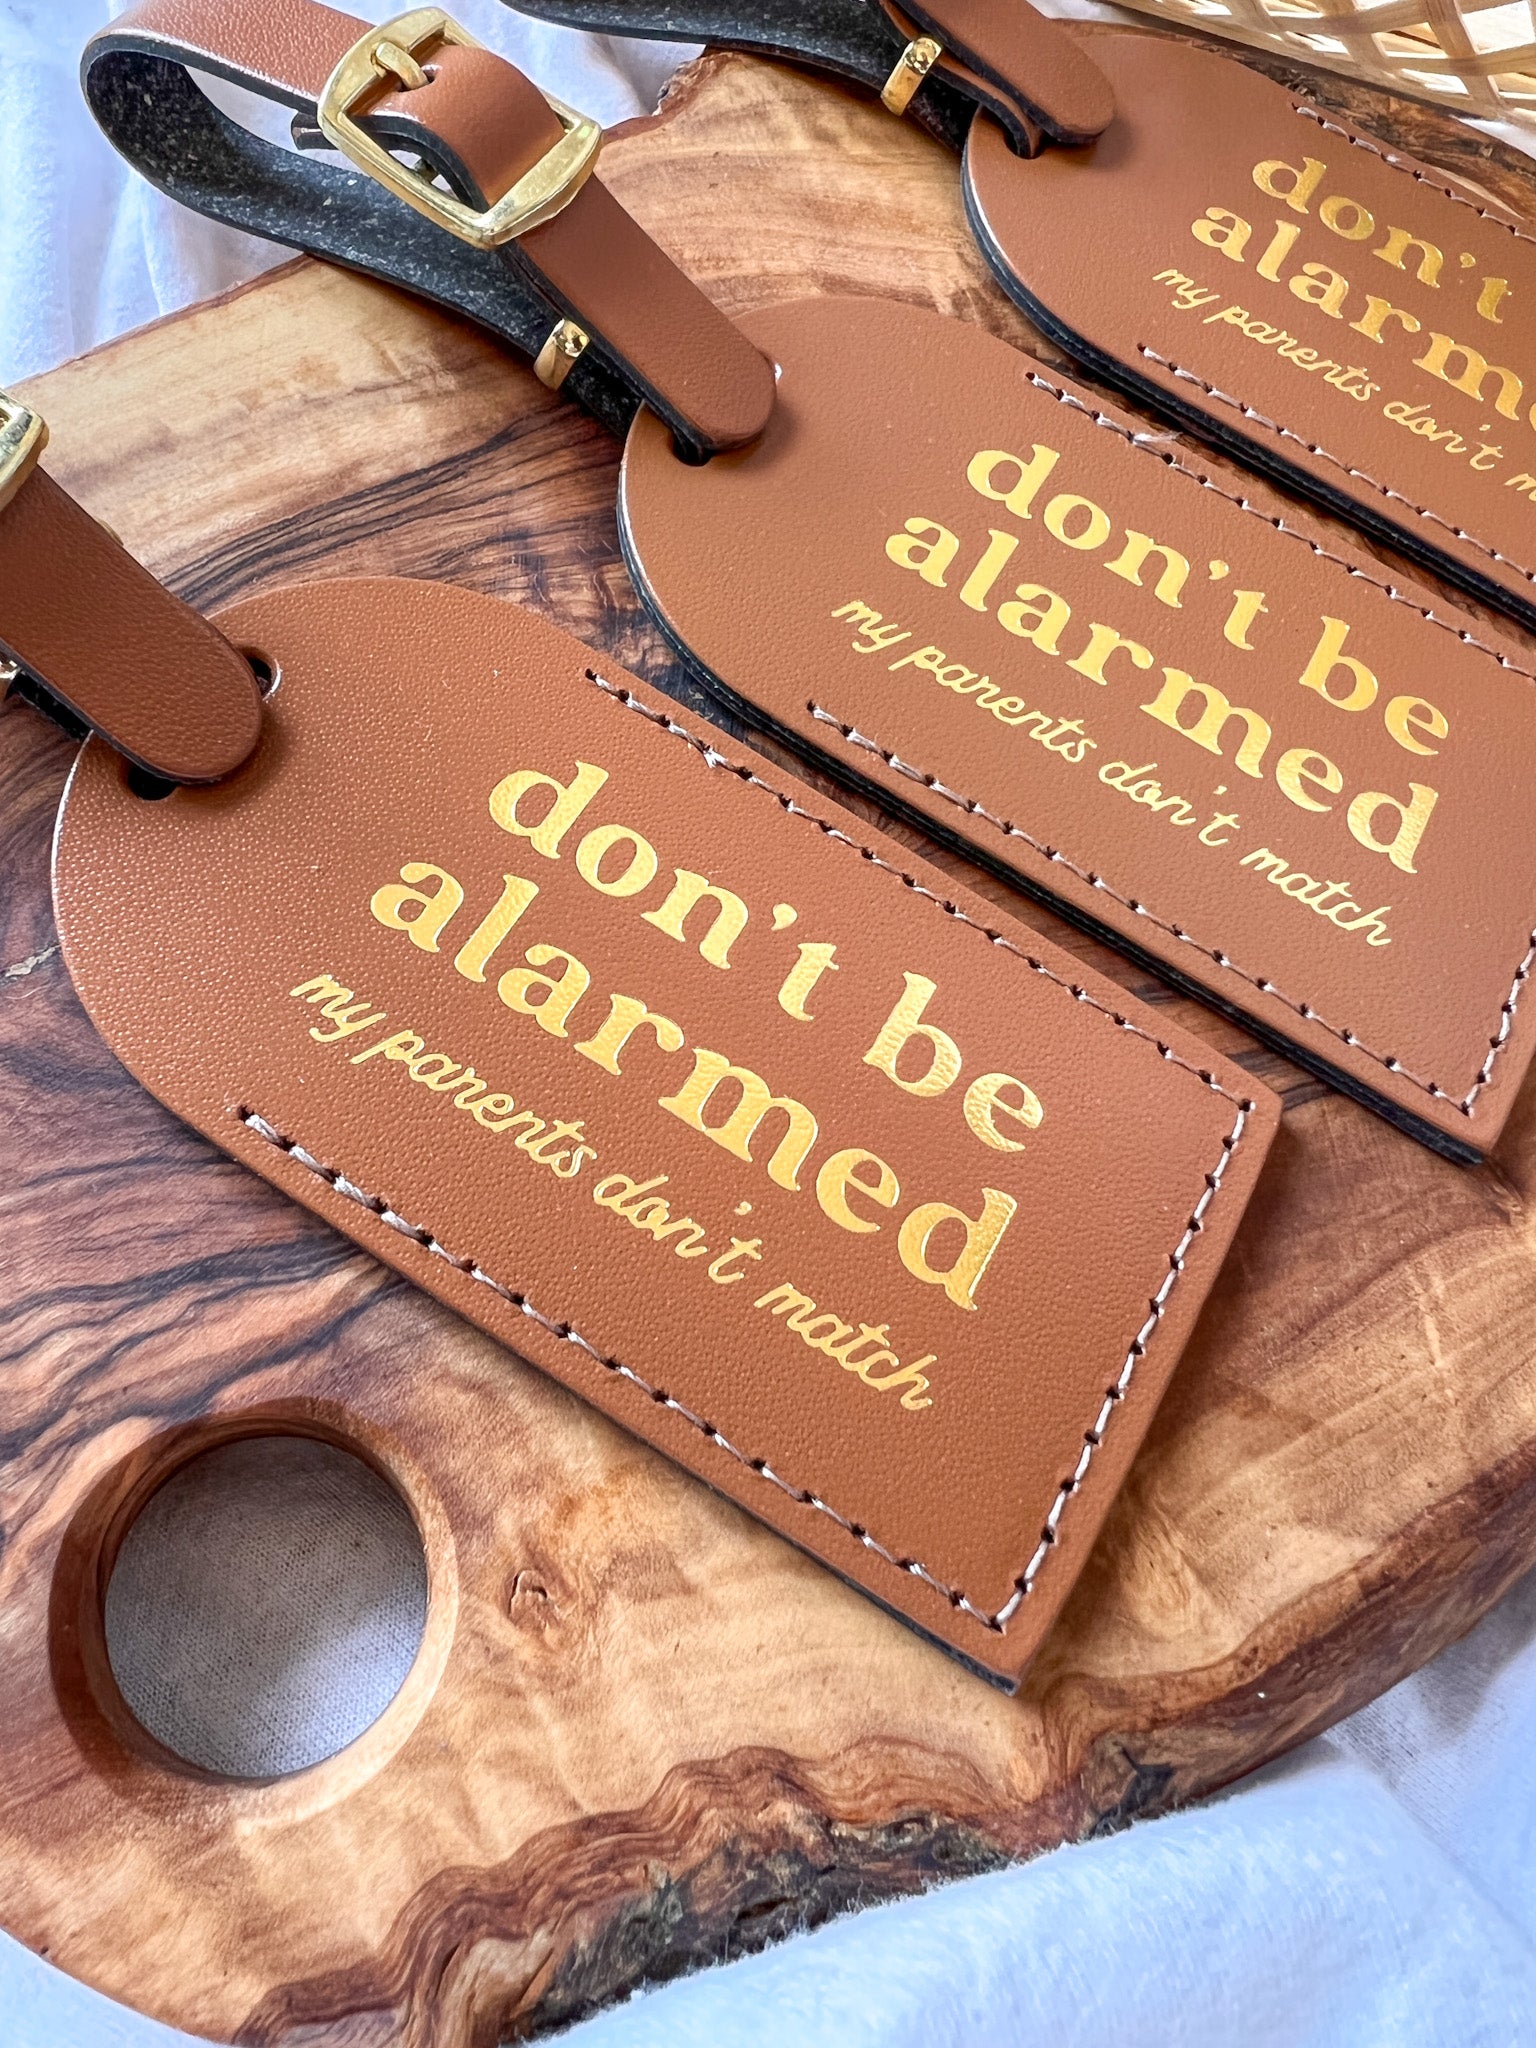 "Don't Be Alarmed" Leather Luggage Tag.